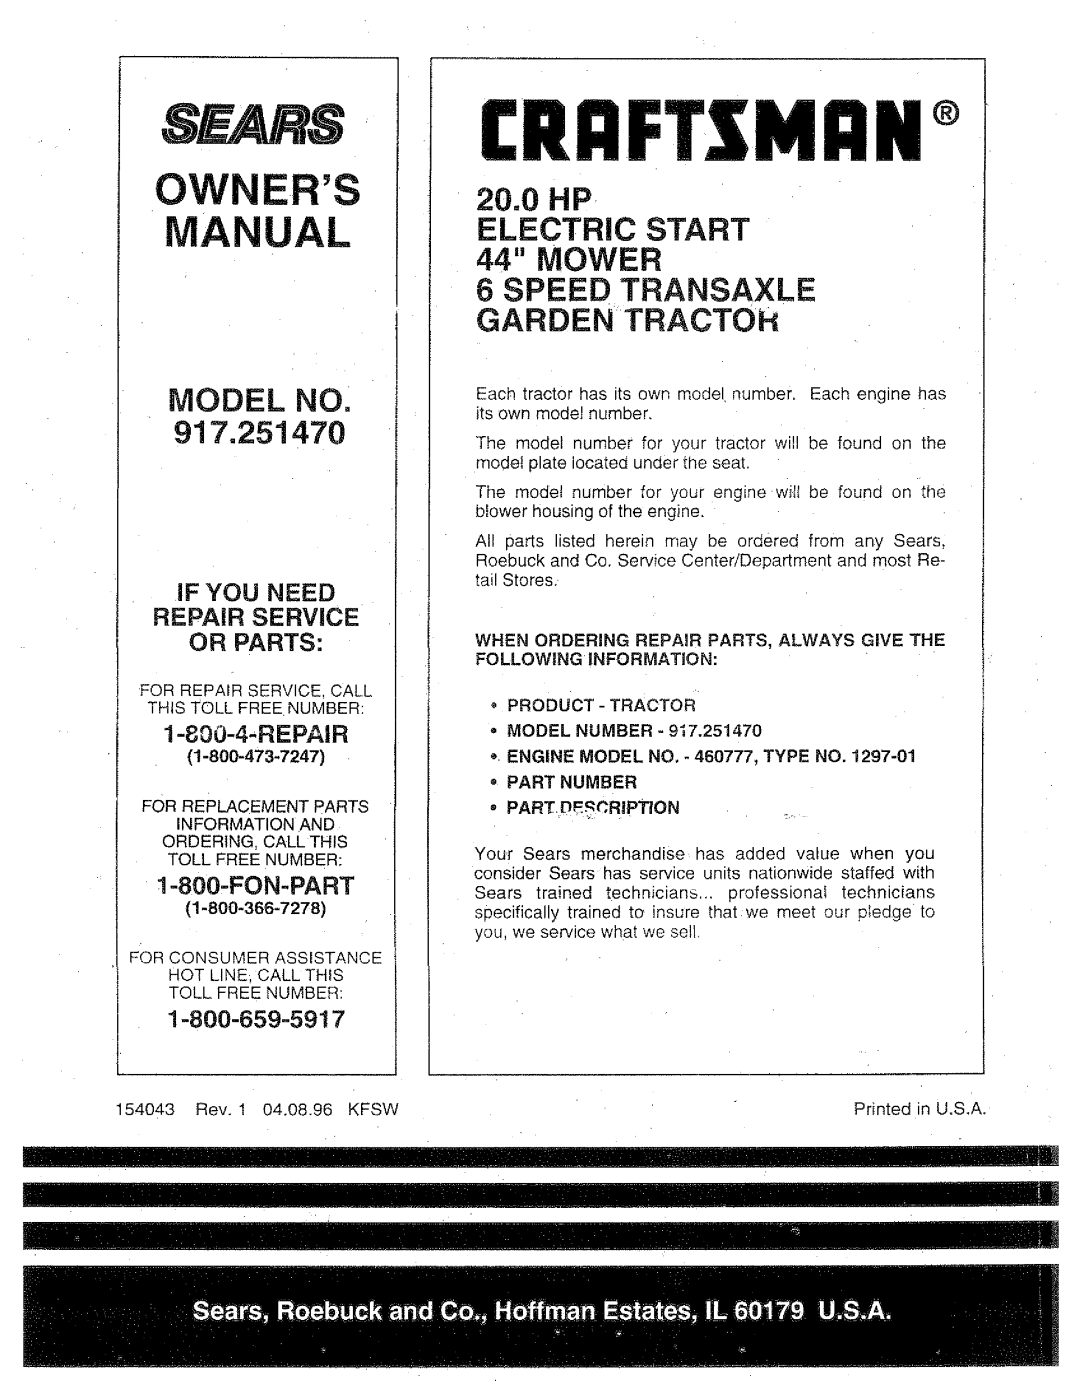 Sears Owners Manual, Model No, 917.251470, 20.0HP ELECTRIC START 44 MOWER, Speed Transaxle Garden Tractoh, Repair 